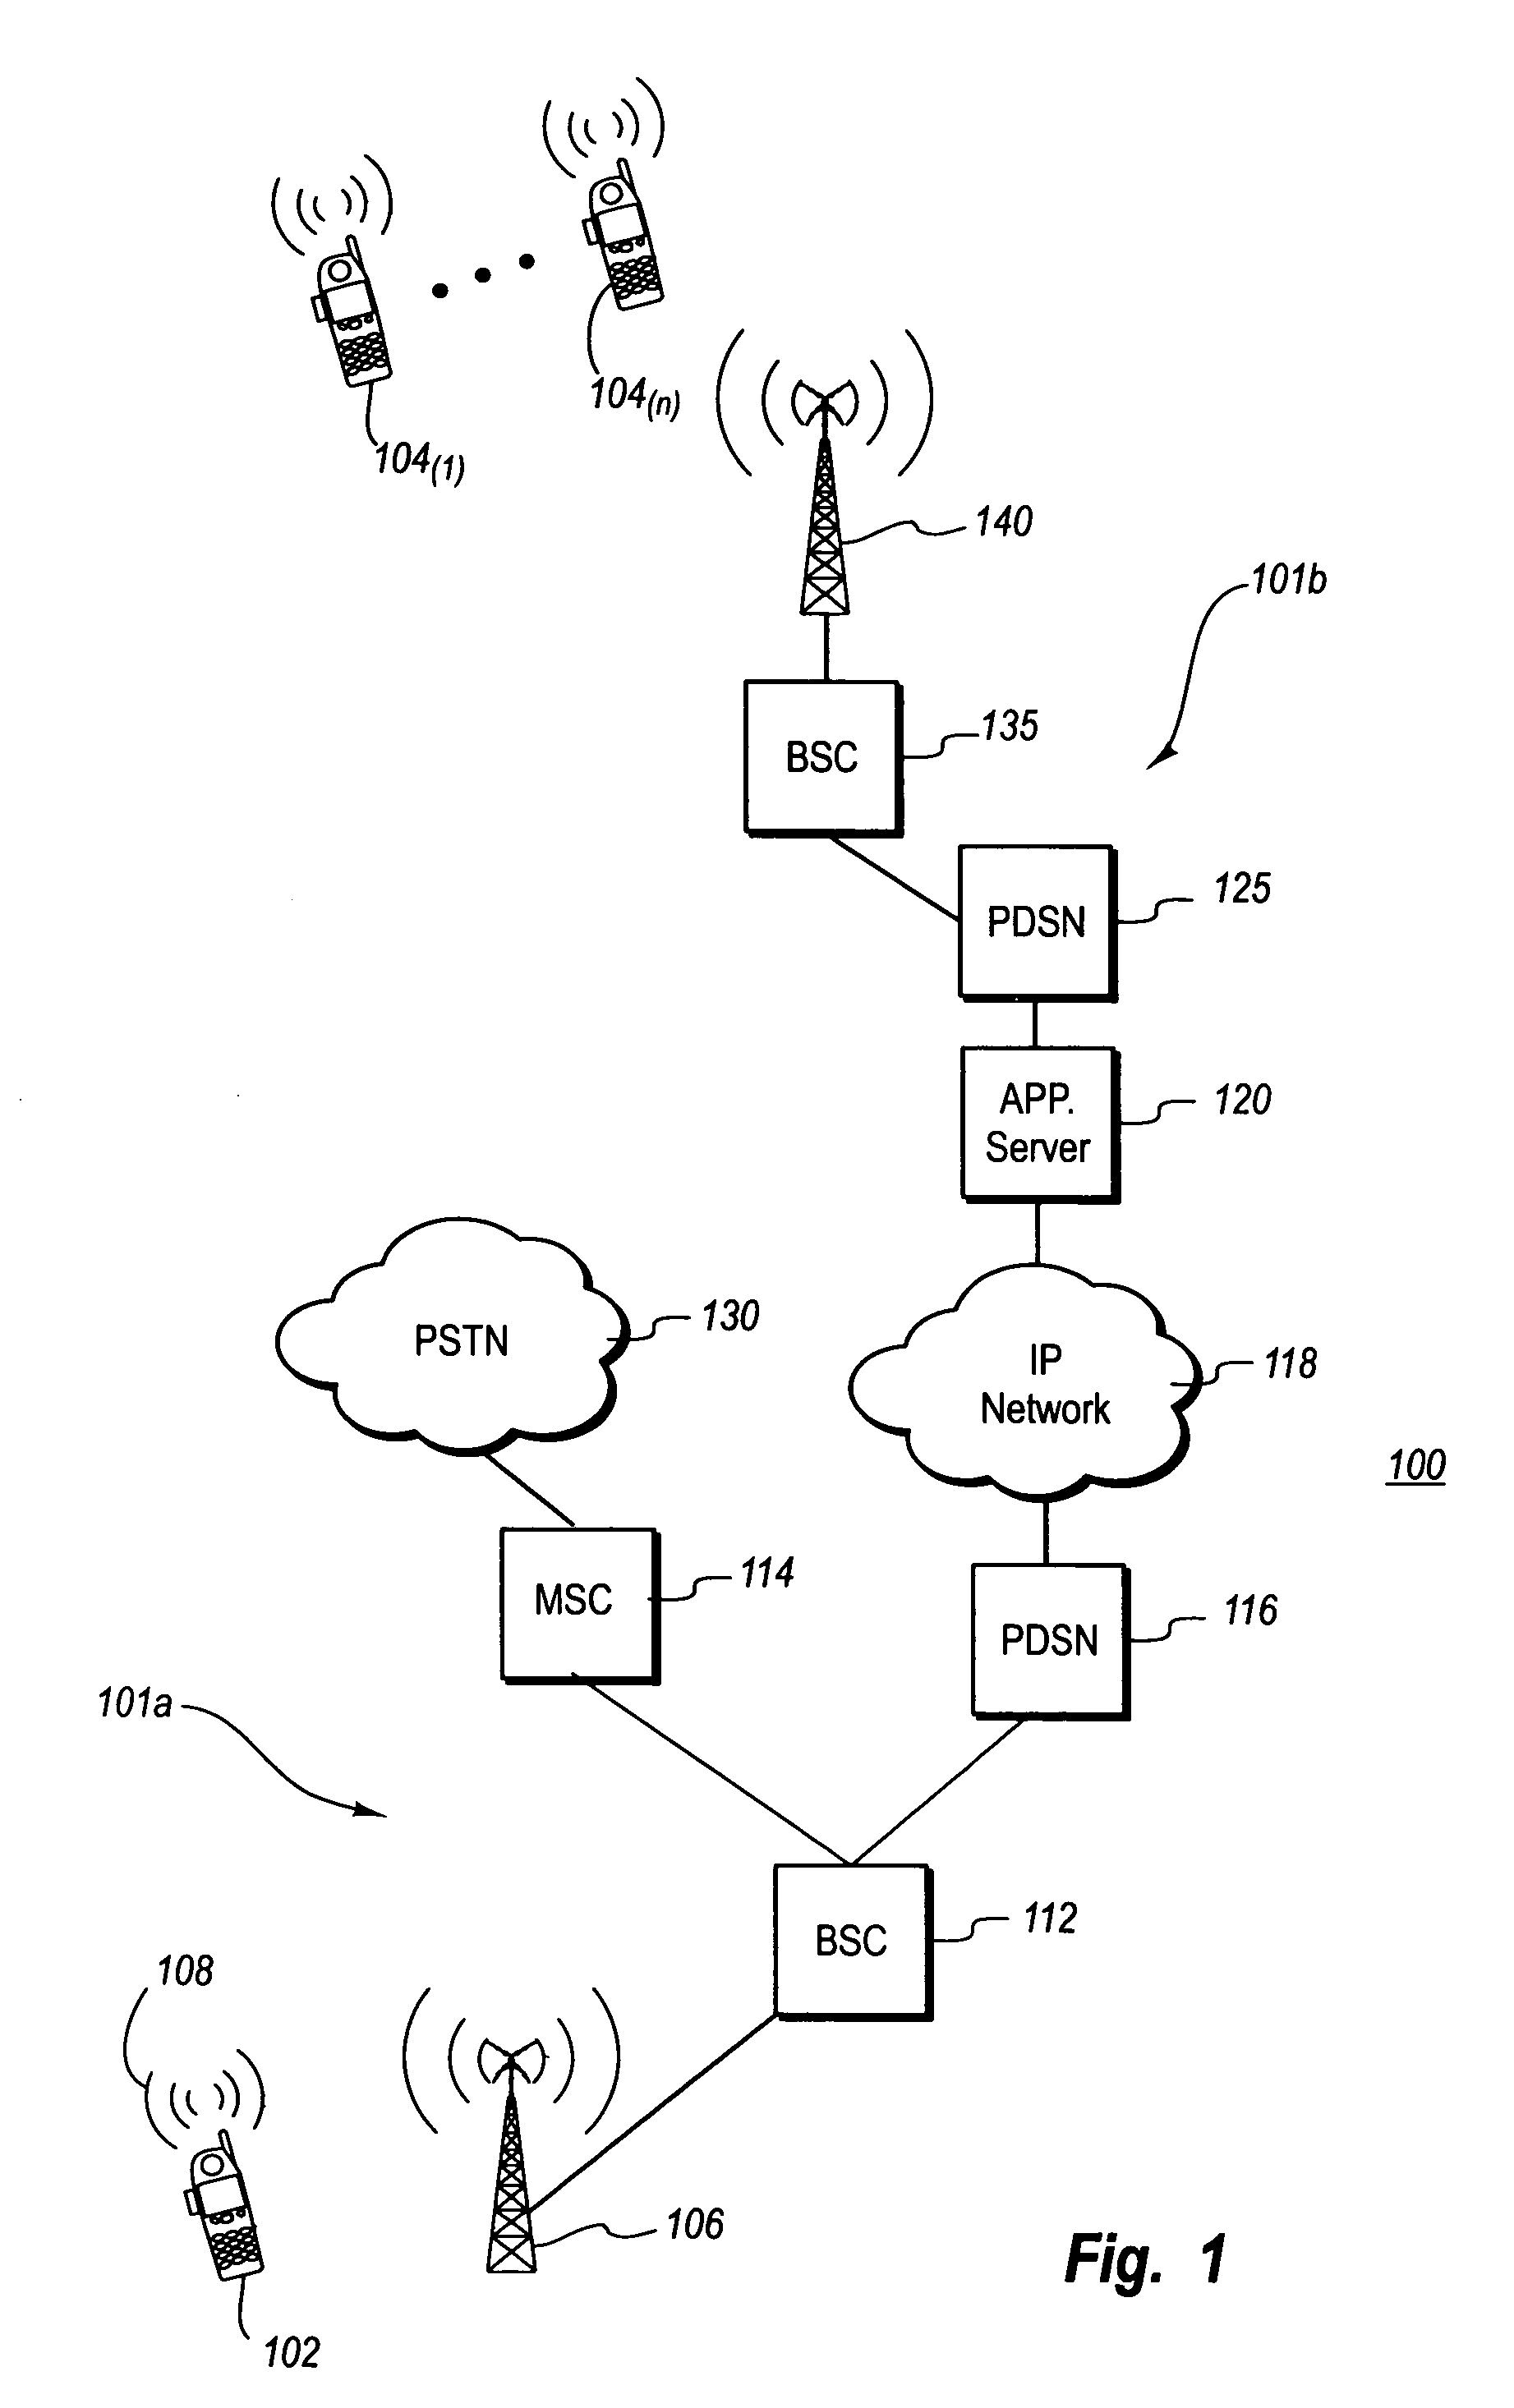 Load balancing between users of a wireless base station